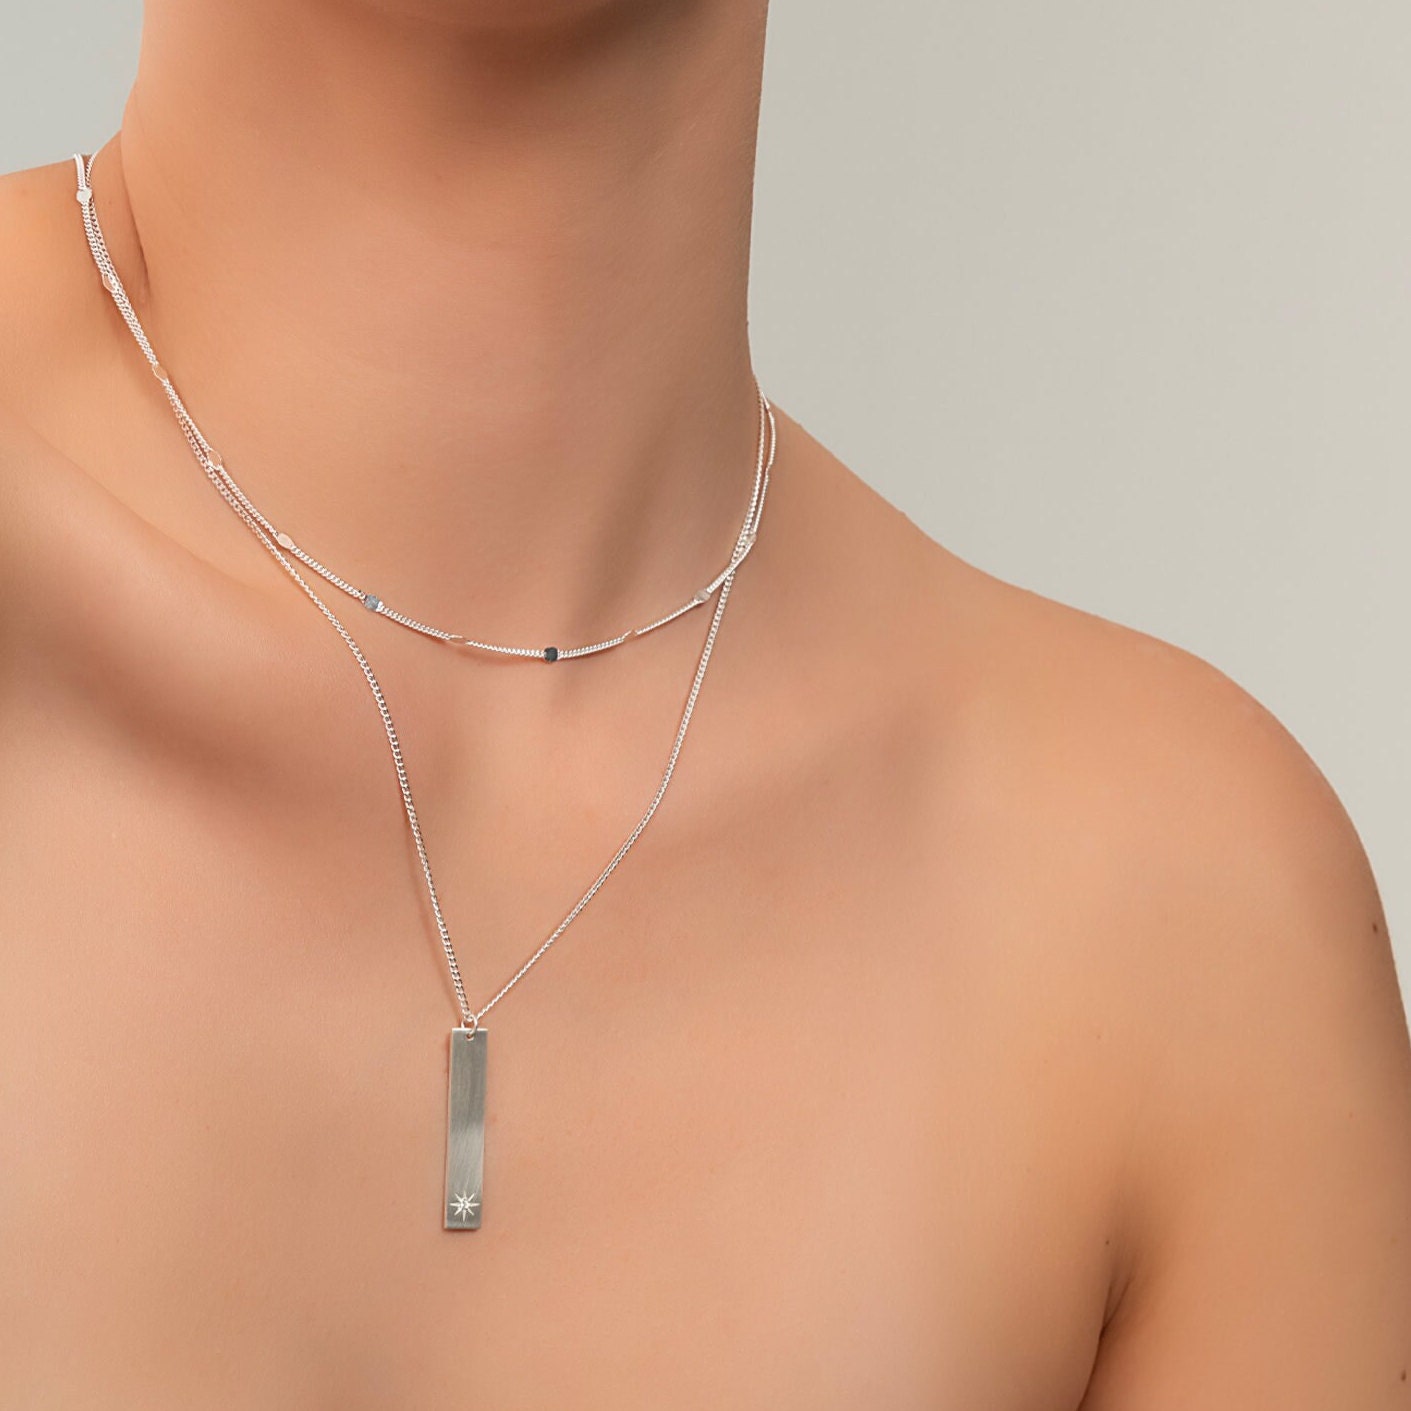 Silver "North Star" Necklace with Rectangular Pendant